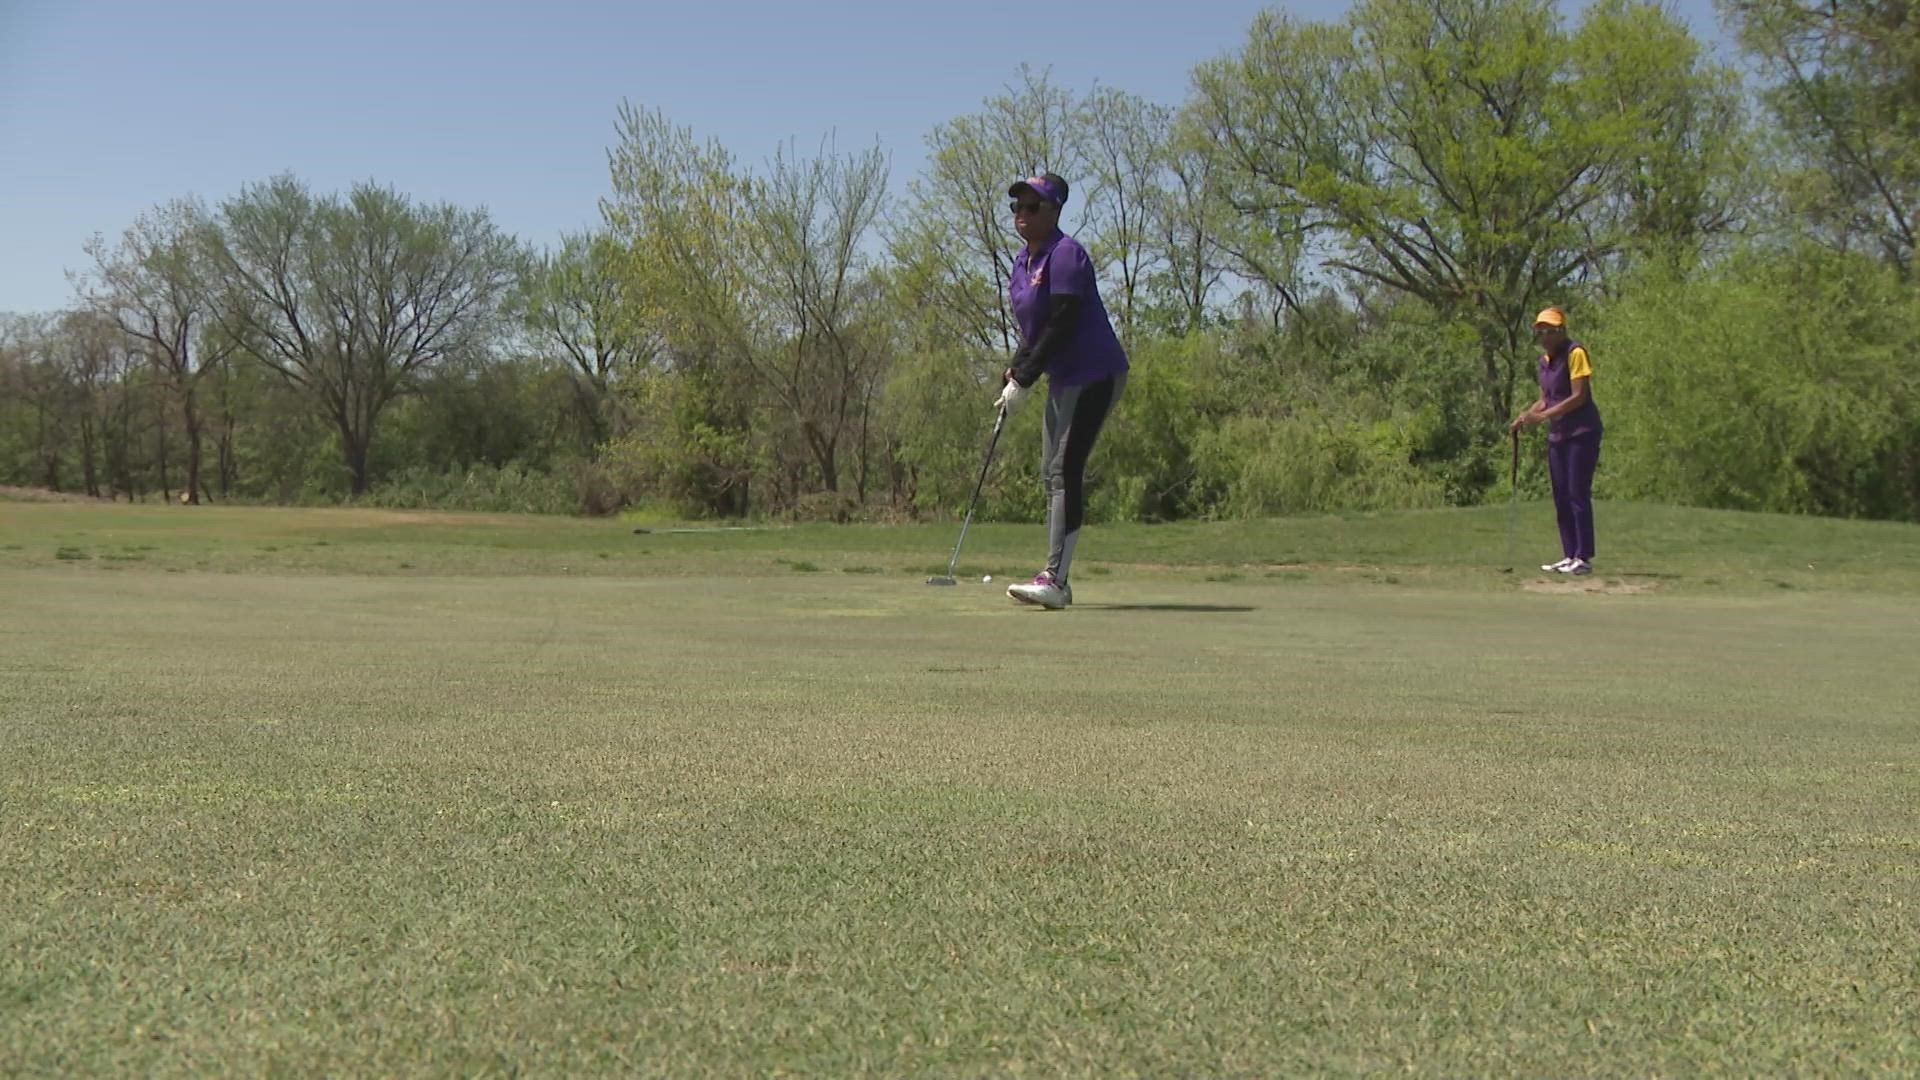 A historic golf course that was part of the civil rights movement is among those in need of repairs.